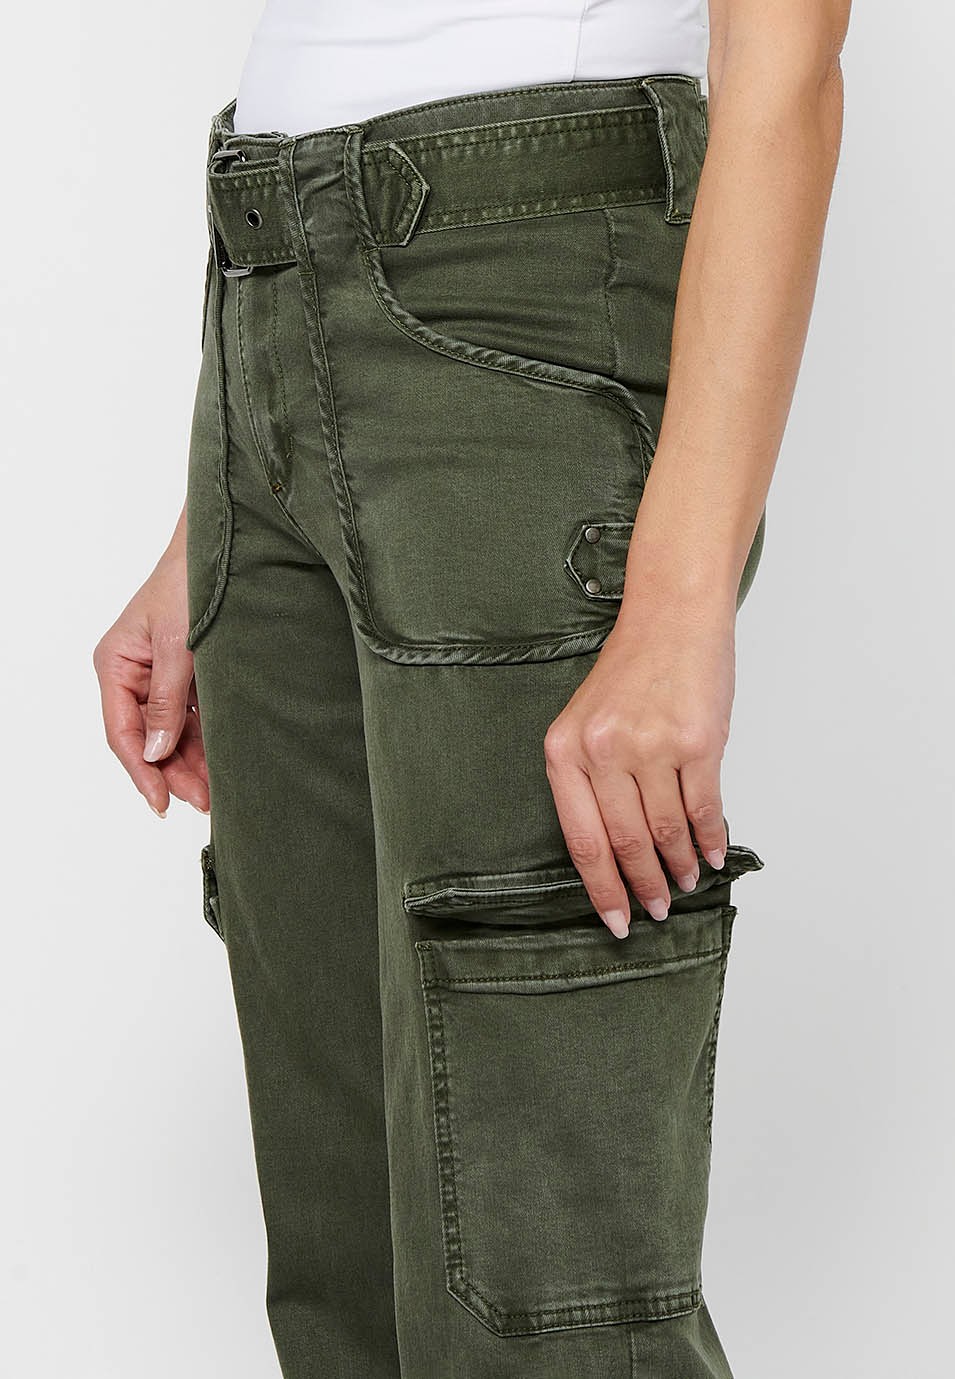 Long straight-cut pants with front zipper closure and button with patch pockets in Khaki Color for Women 6